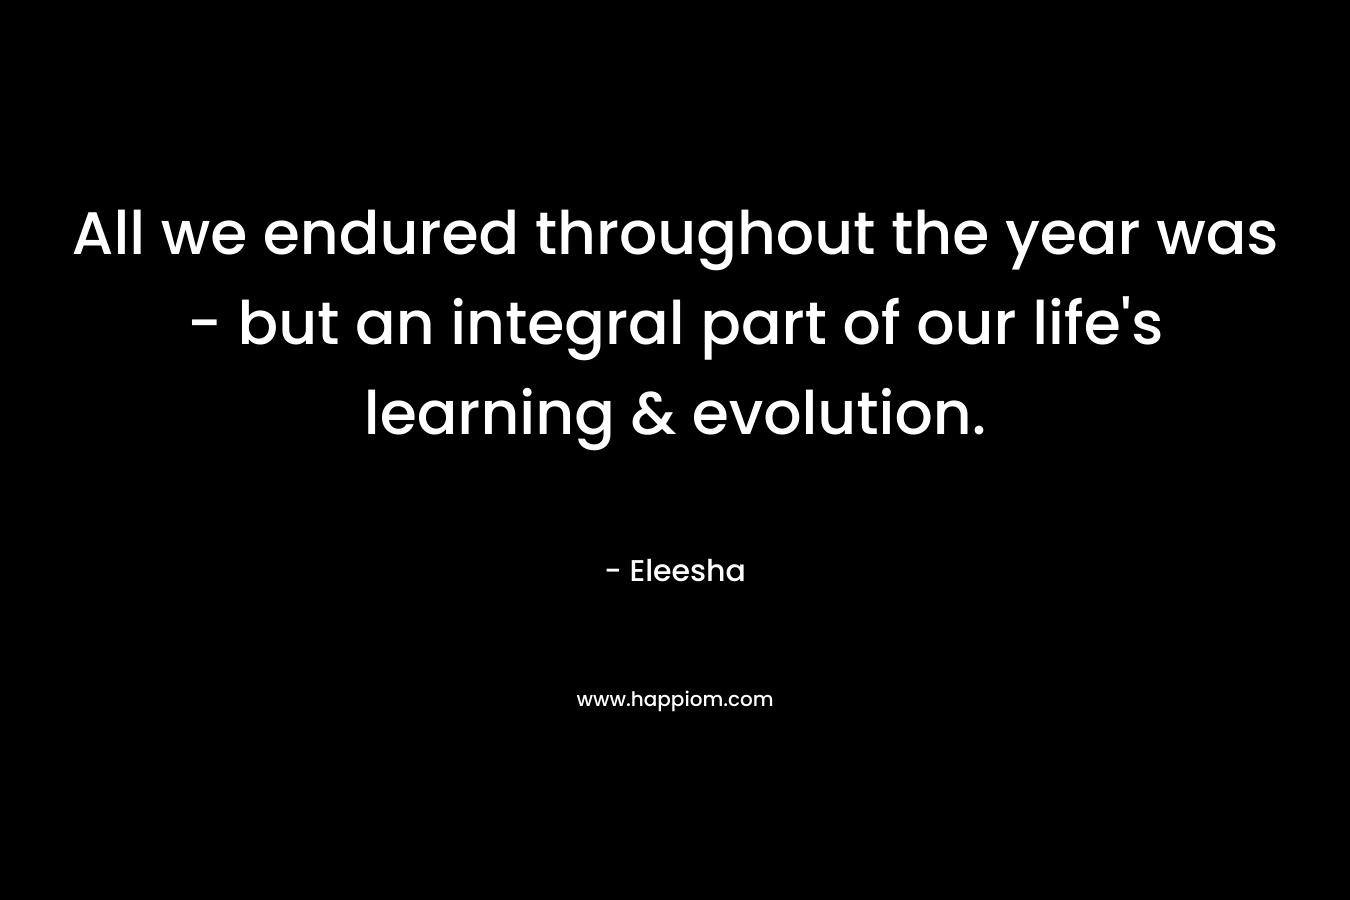 All we endured throughout the year was – but an integral part of our life’s learning & evolution. – Eleesha